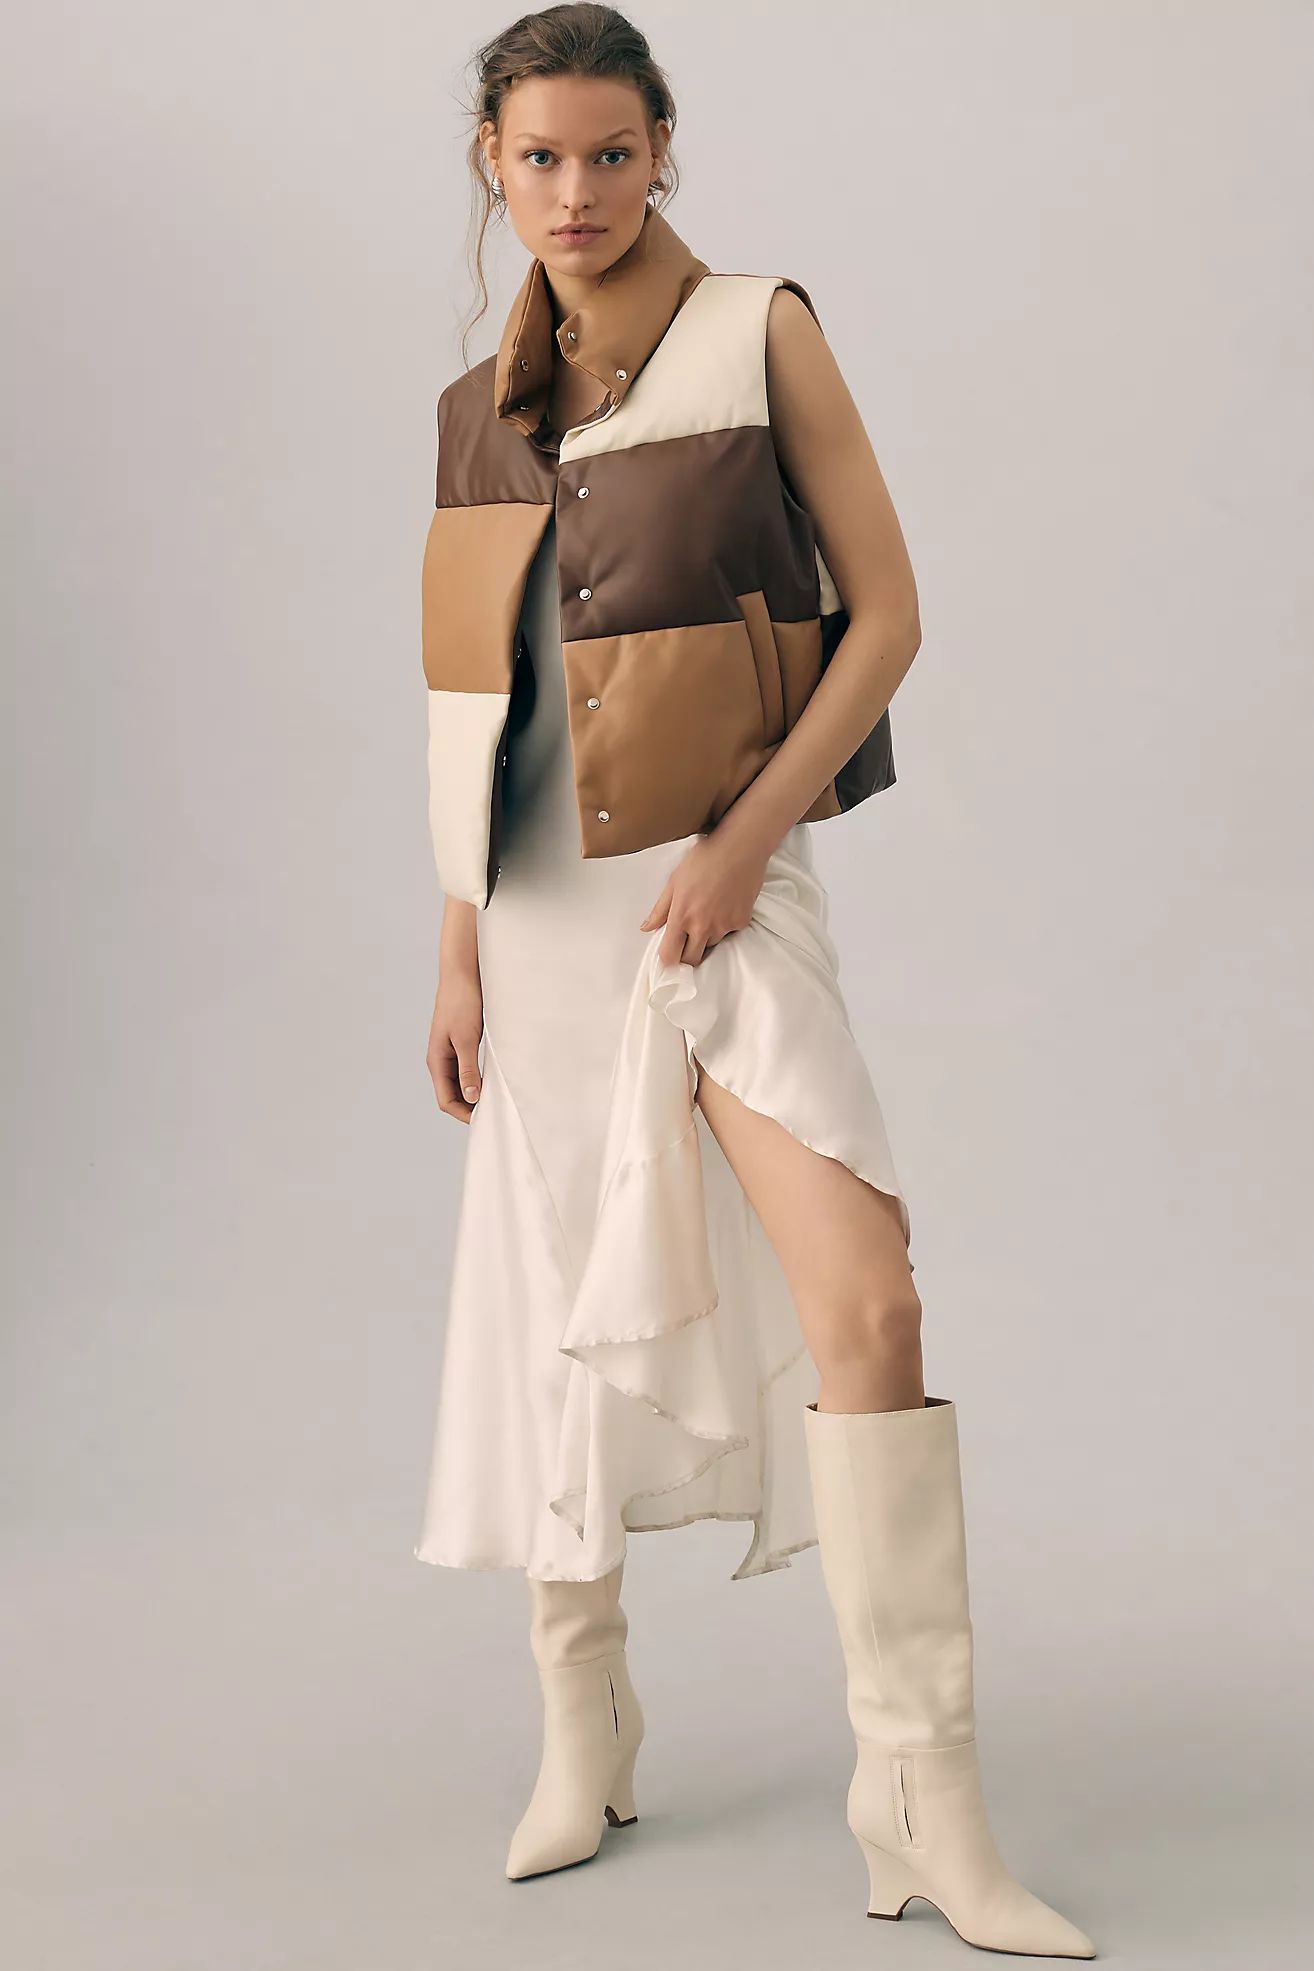 By Anthropologie Faux Leather Colorblock Vest | Anthropologie (US)